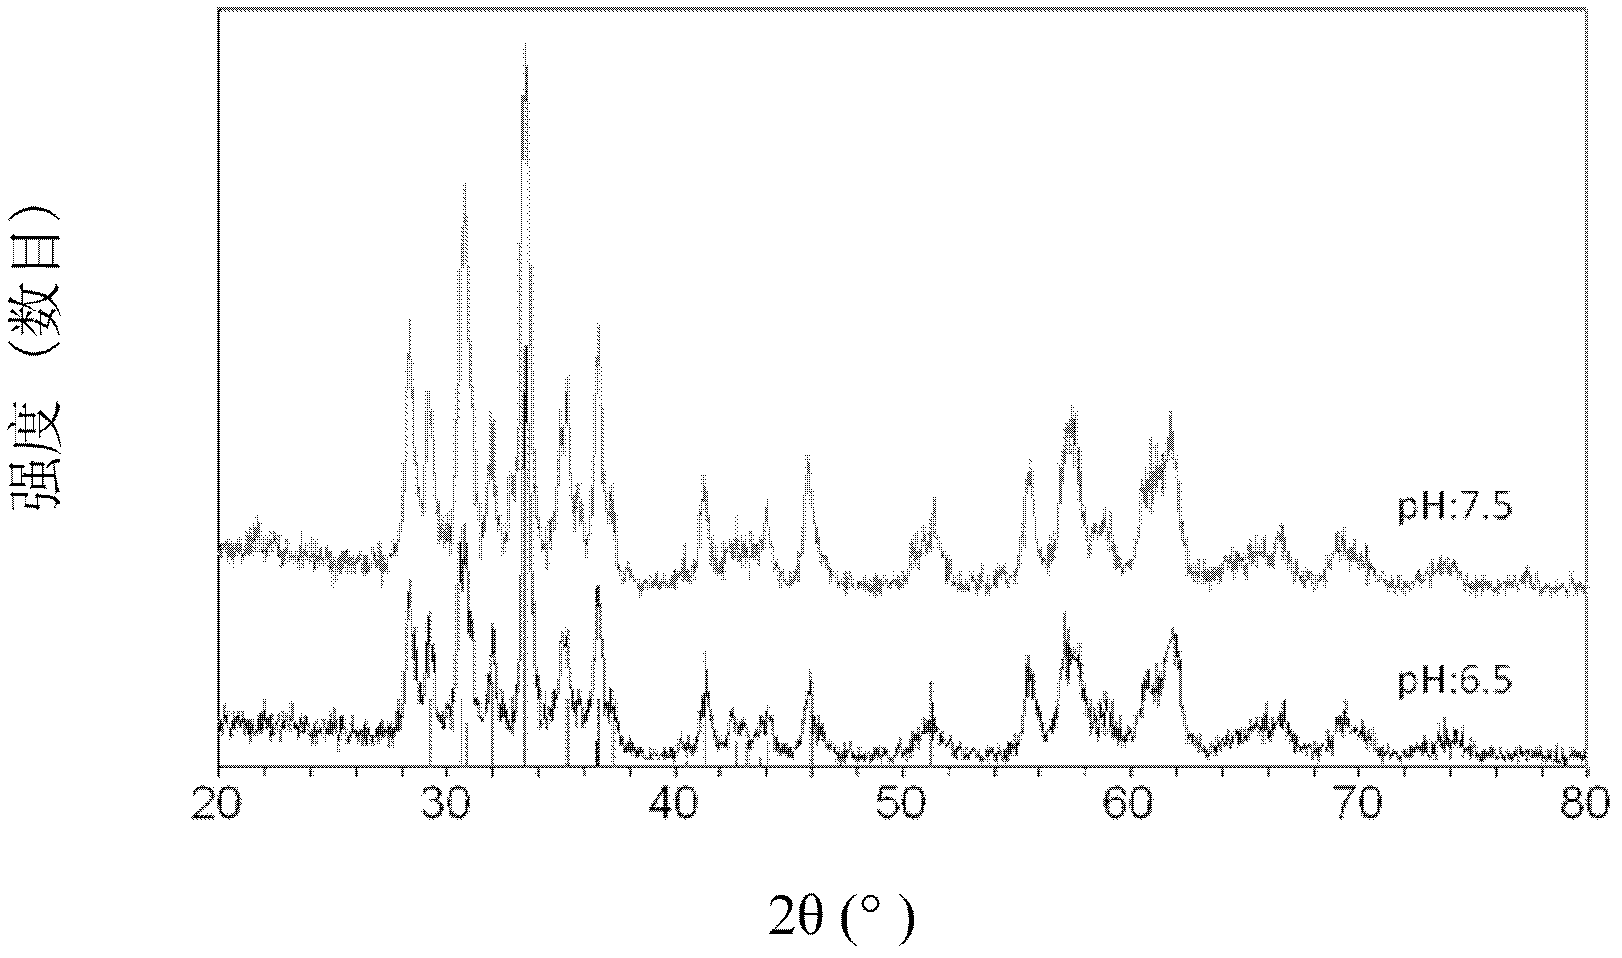 Indium gallium zinc oxide as well as preparation method and application thereof